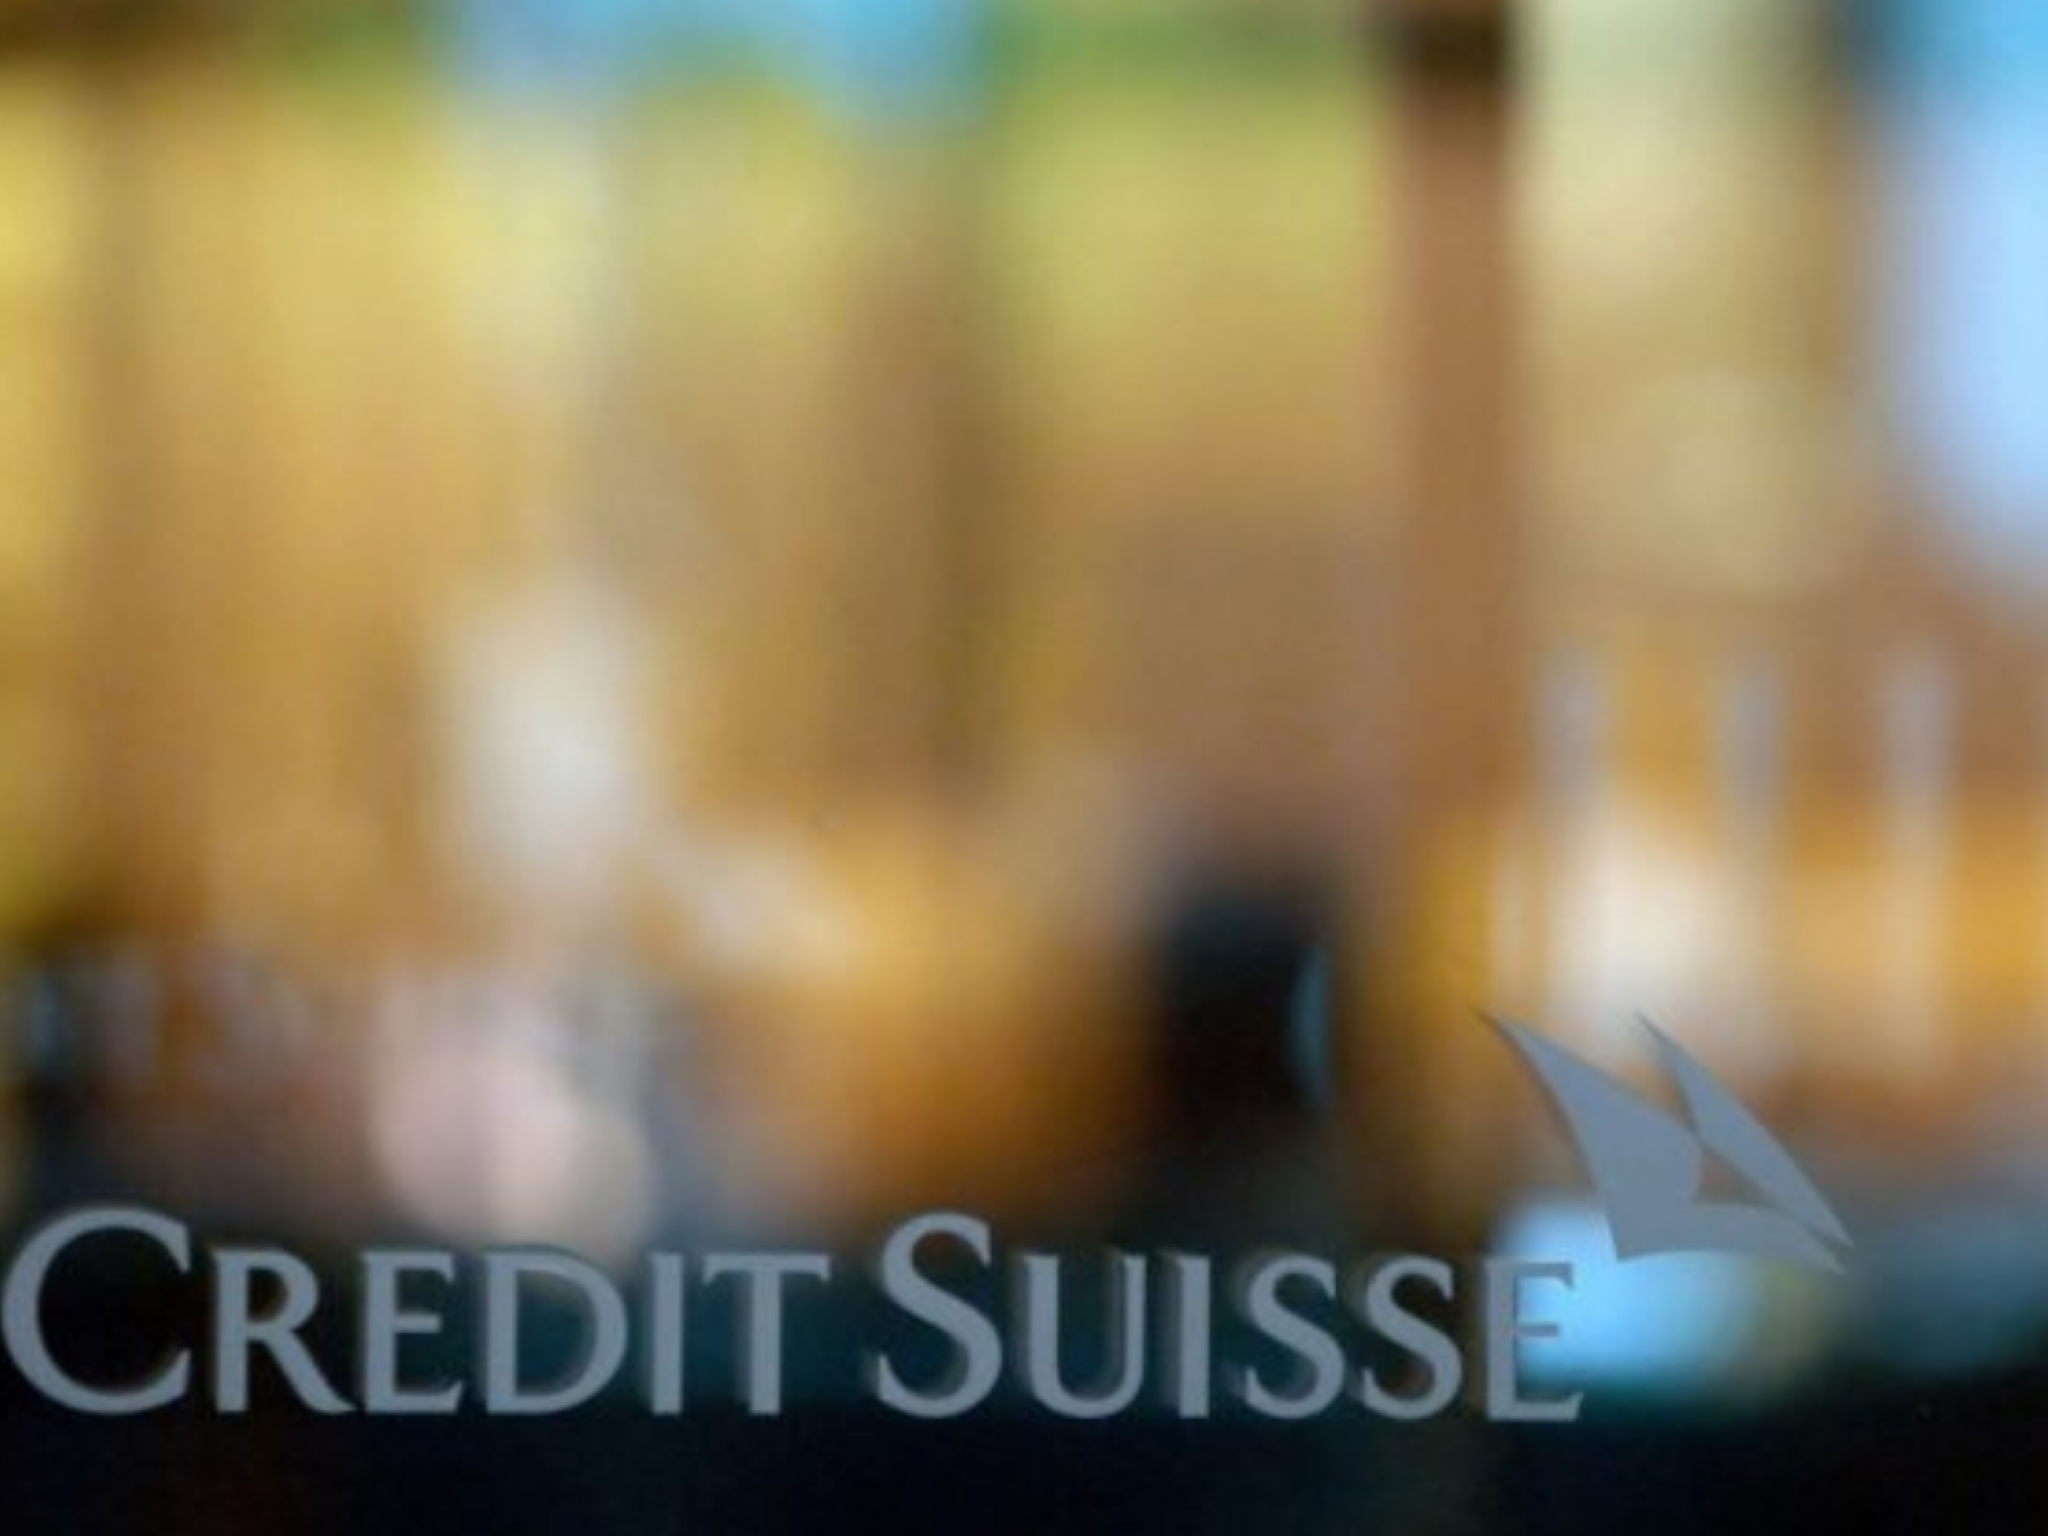  credit-suisse-looking-to-sell-its-china-securities-brokerage-business-due-to-ubs-takeover-report 